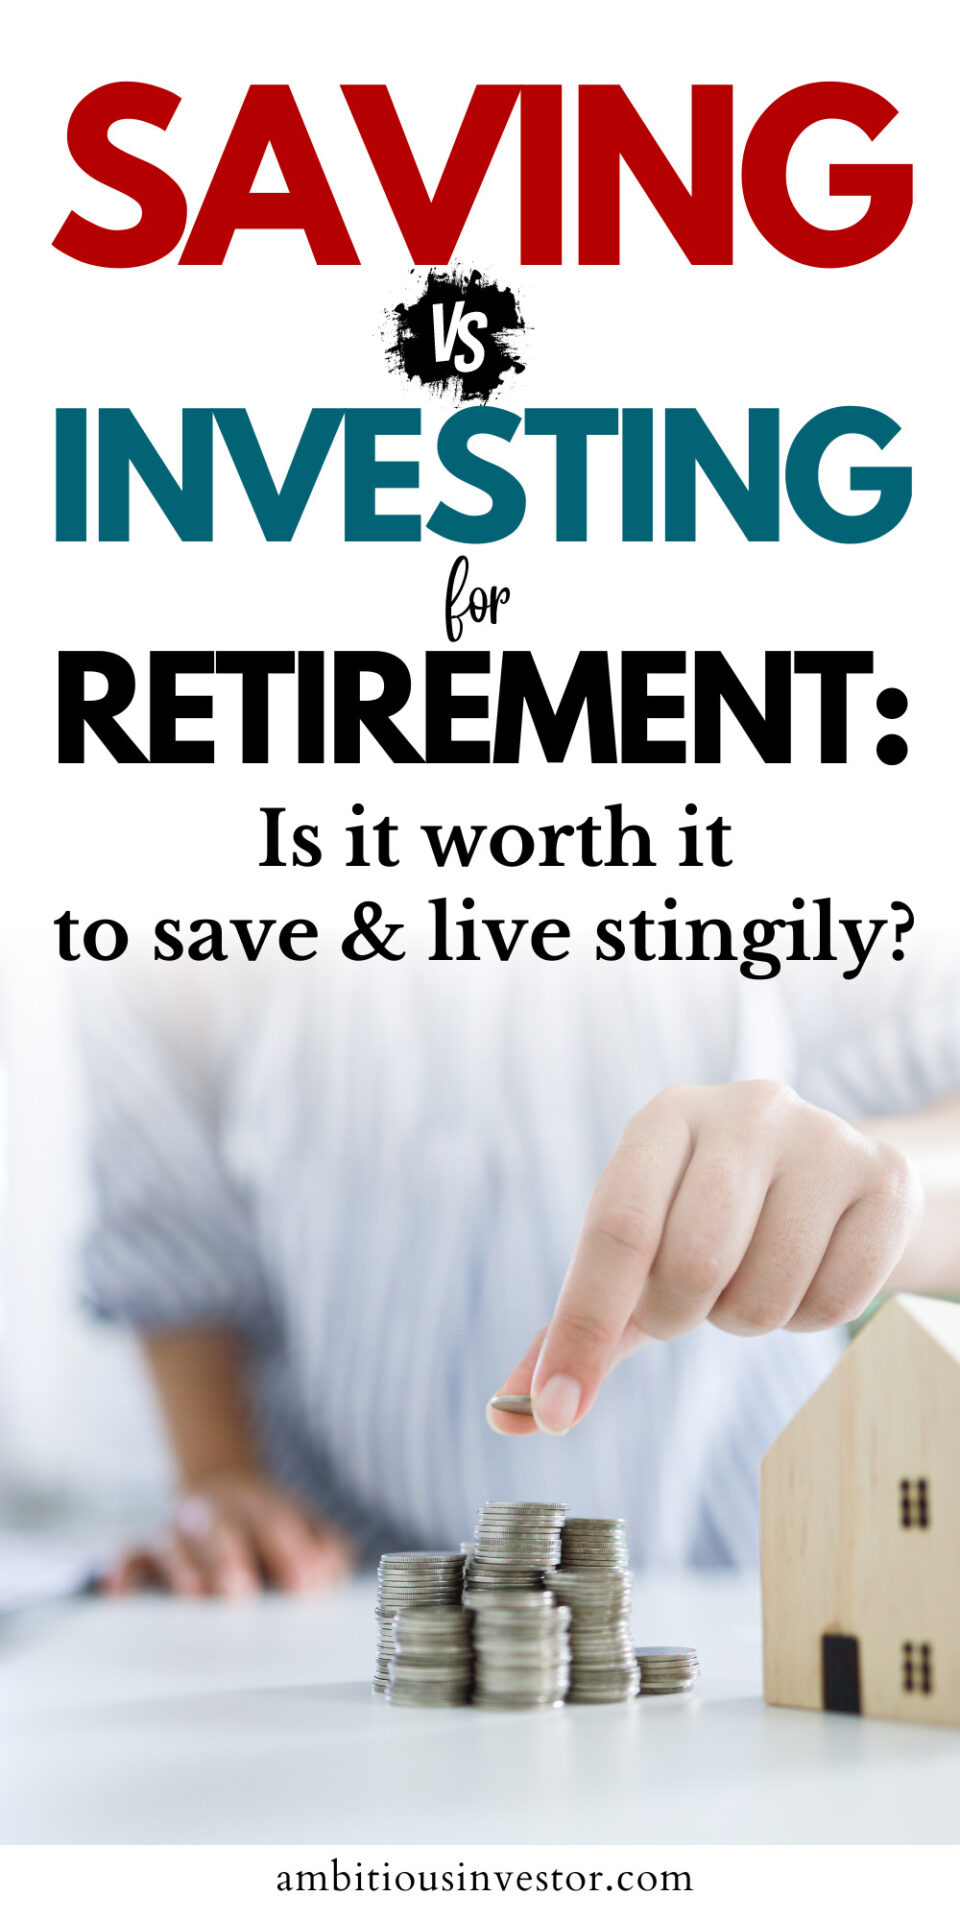 Are you struggling to decide between saving and investing for your retirement? Tired of living frugally just to reach that elusive retirement goal? In this eye-opening discussion, we'll dive deep into the world of retirement planning and explore whether it's really worth it to save every penny and live stingily, or if there's a more rewarding approach to securing your financial future.